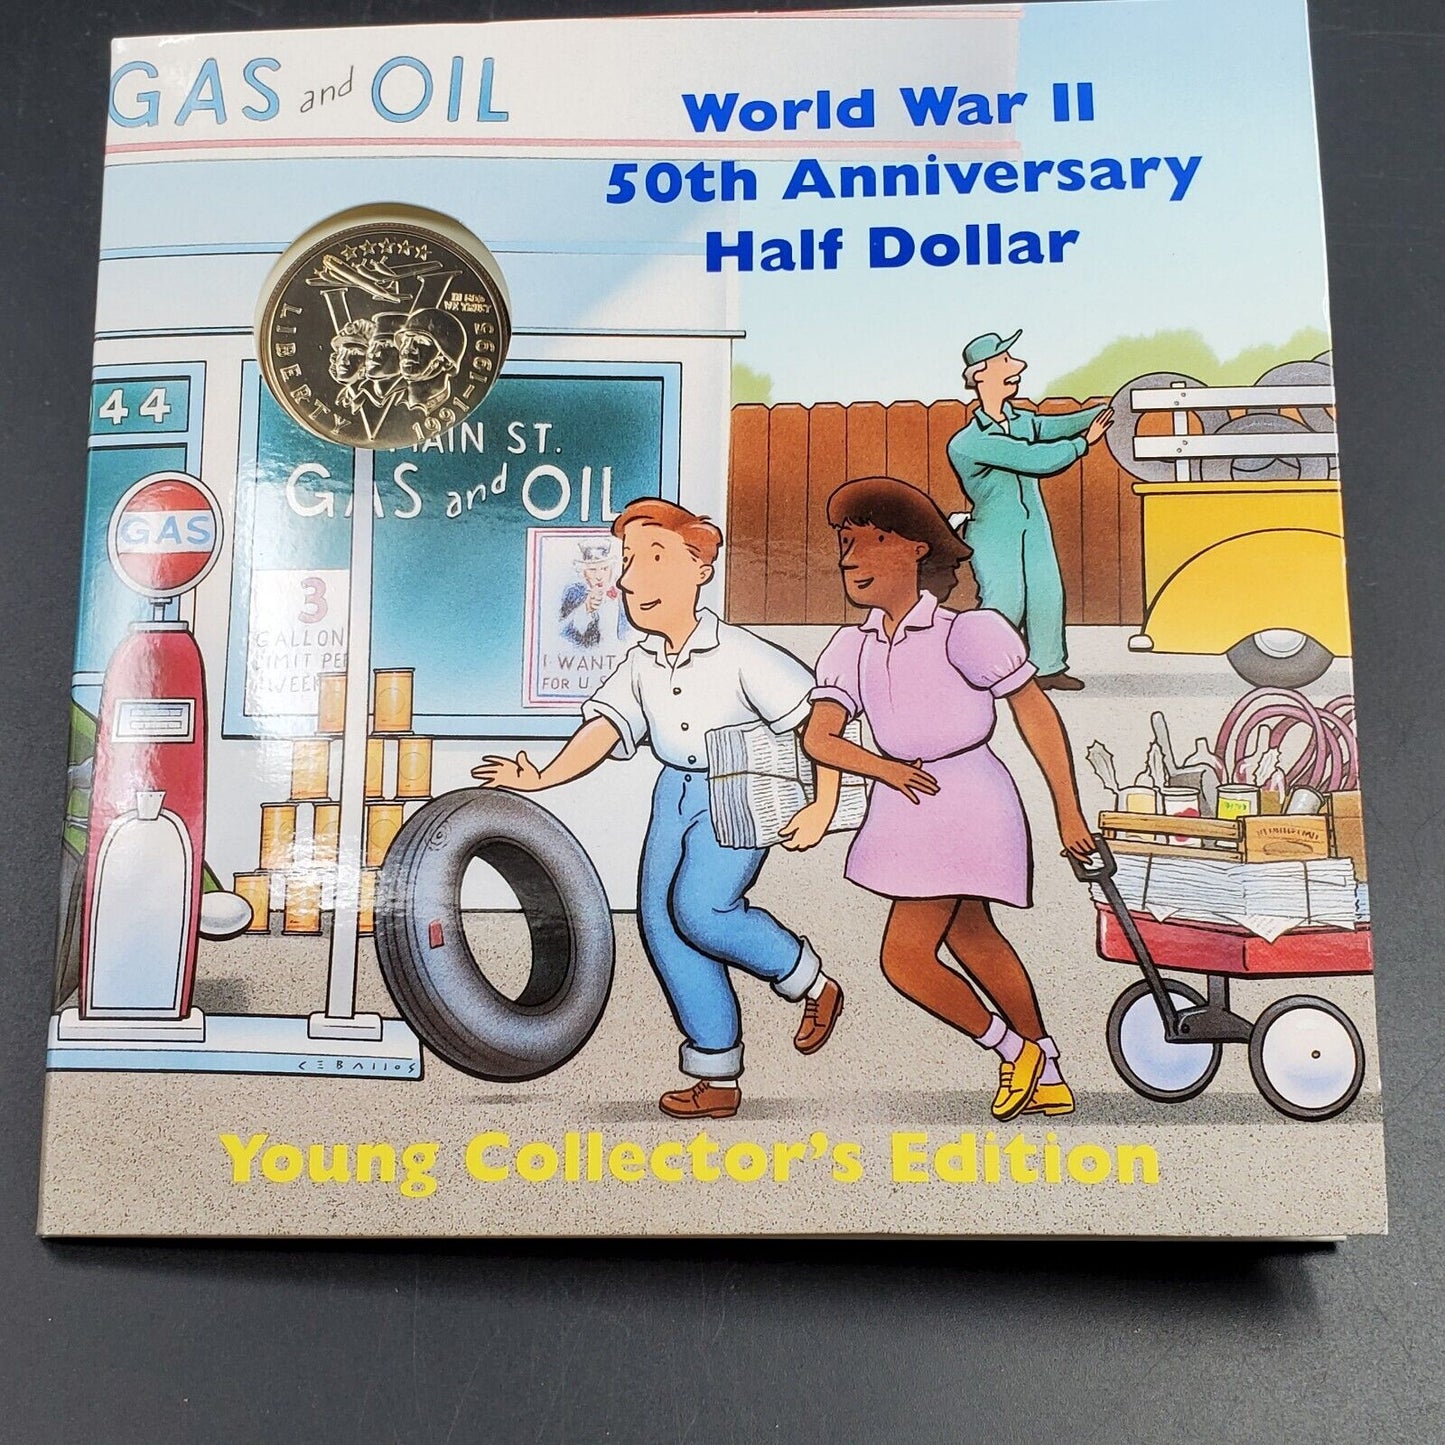 1993 US World War II Commemorative Half Dollar Coin Young Collector's Edition